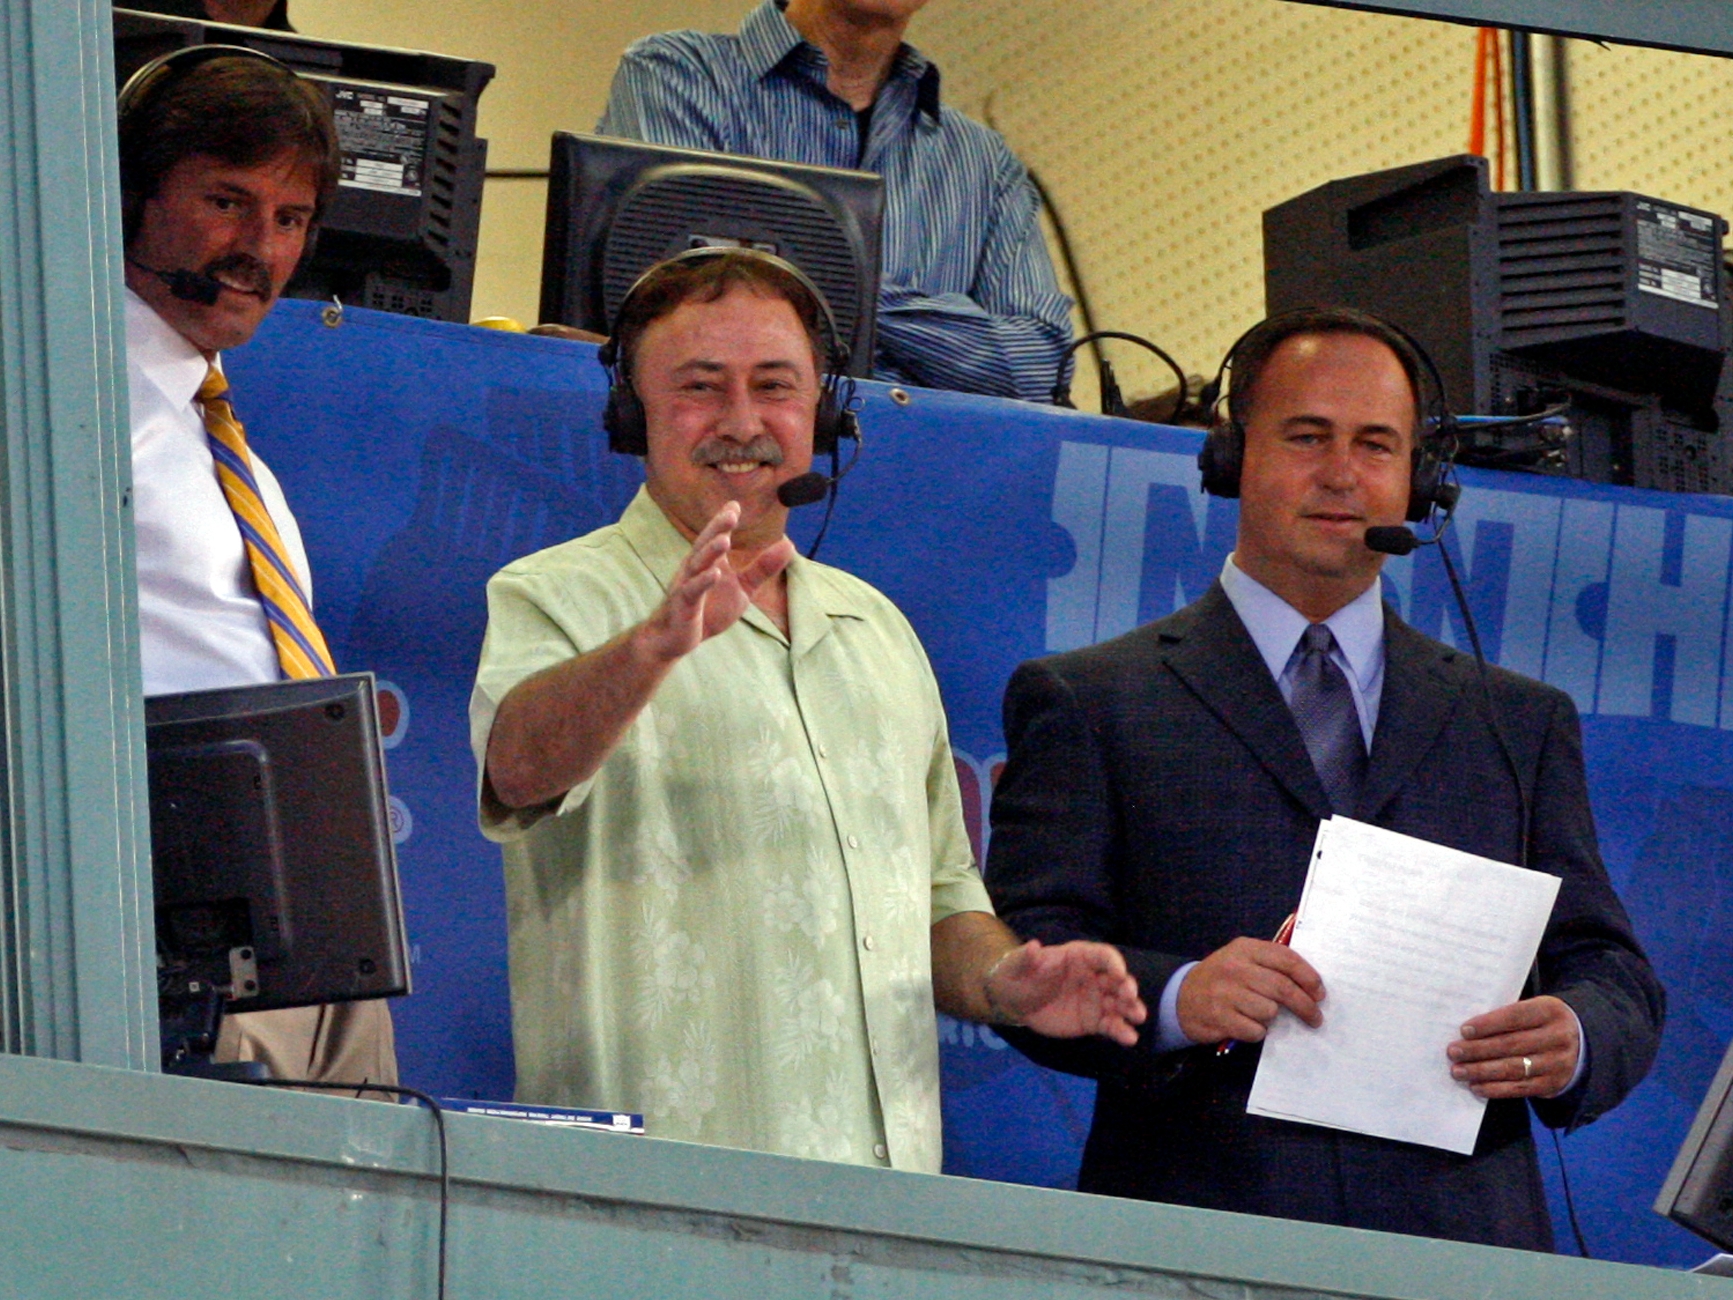 Jerry Remy, Boston Red Sox Player and Broadcaster, Dies - The